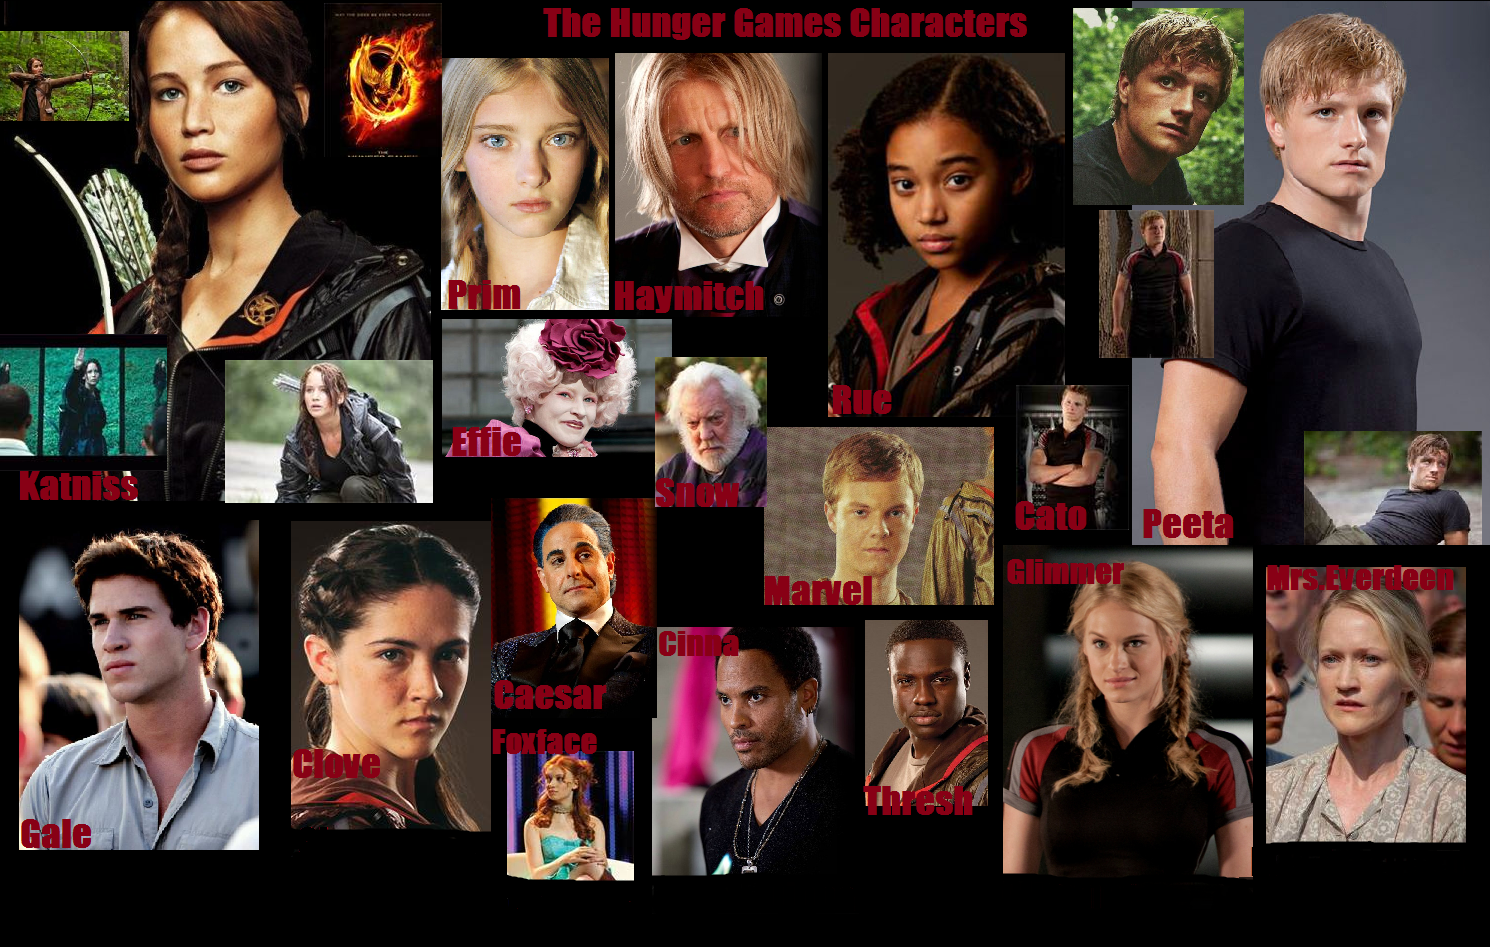 The Hunger Games Photo: Hunger Games Characters. Hunger games characters, Hunger games, Hunger games image